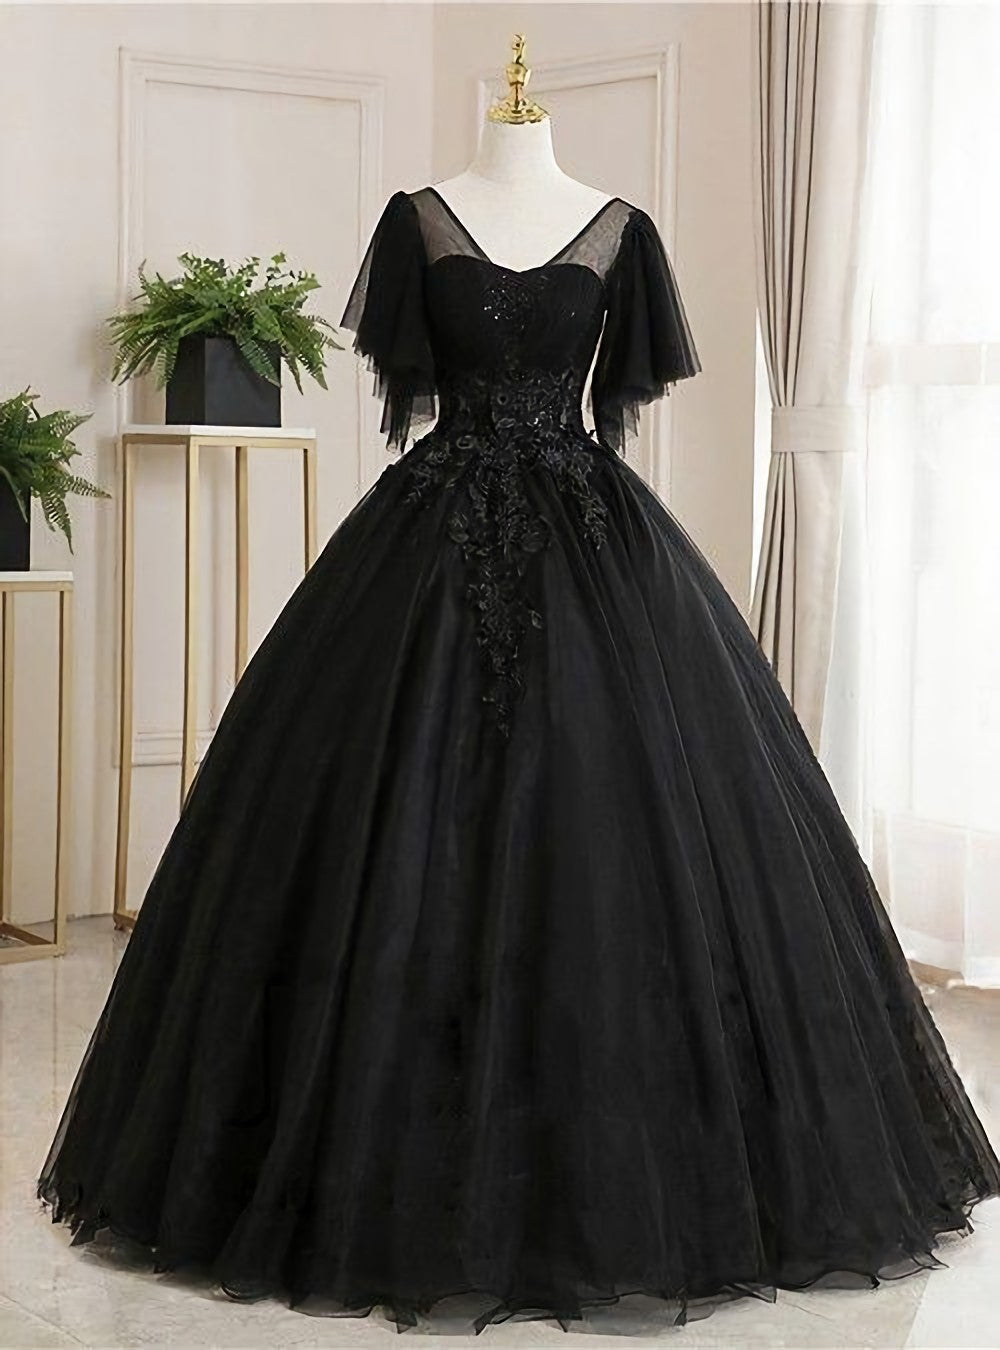 Prom Dress Places, Ball Gown Luxurious Floral Quinceanera Prom Dress, Scoop Neck Short Sleeve Floor Length Tulle With Pleats Embroidery